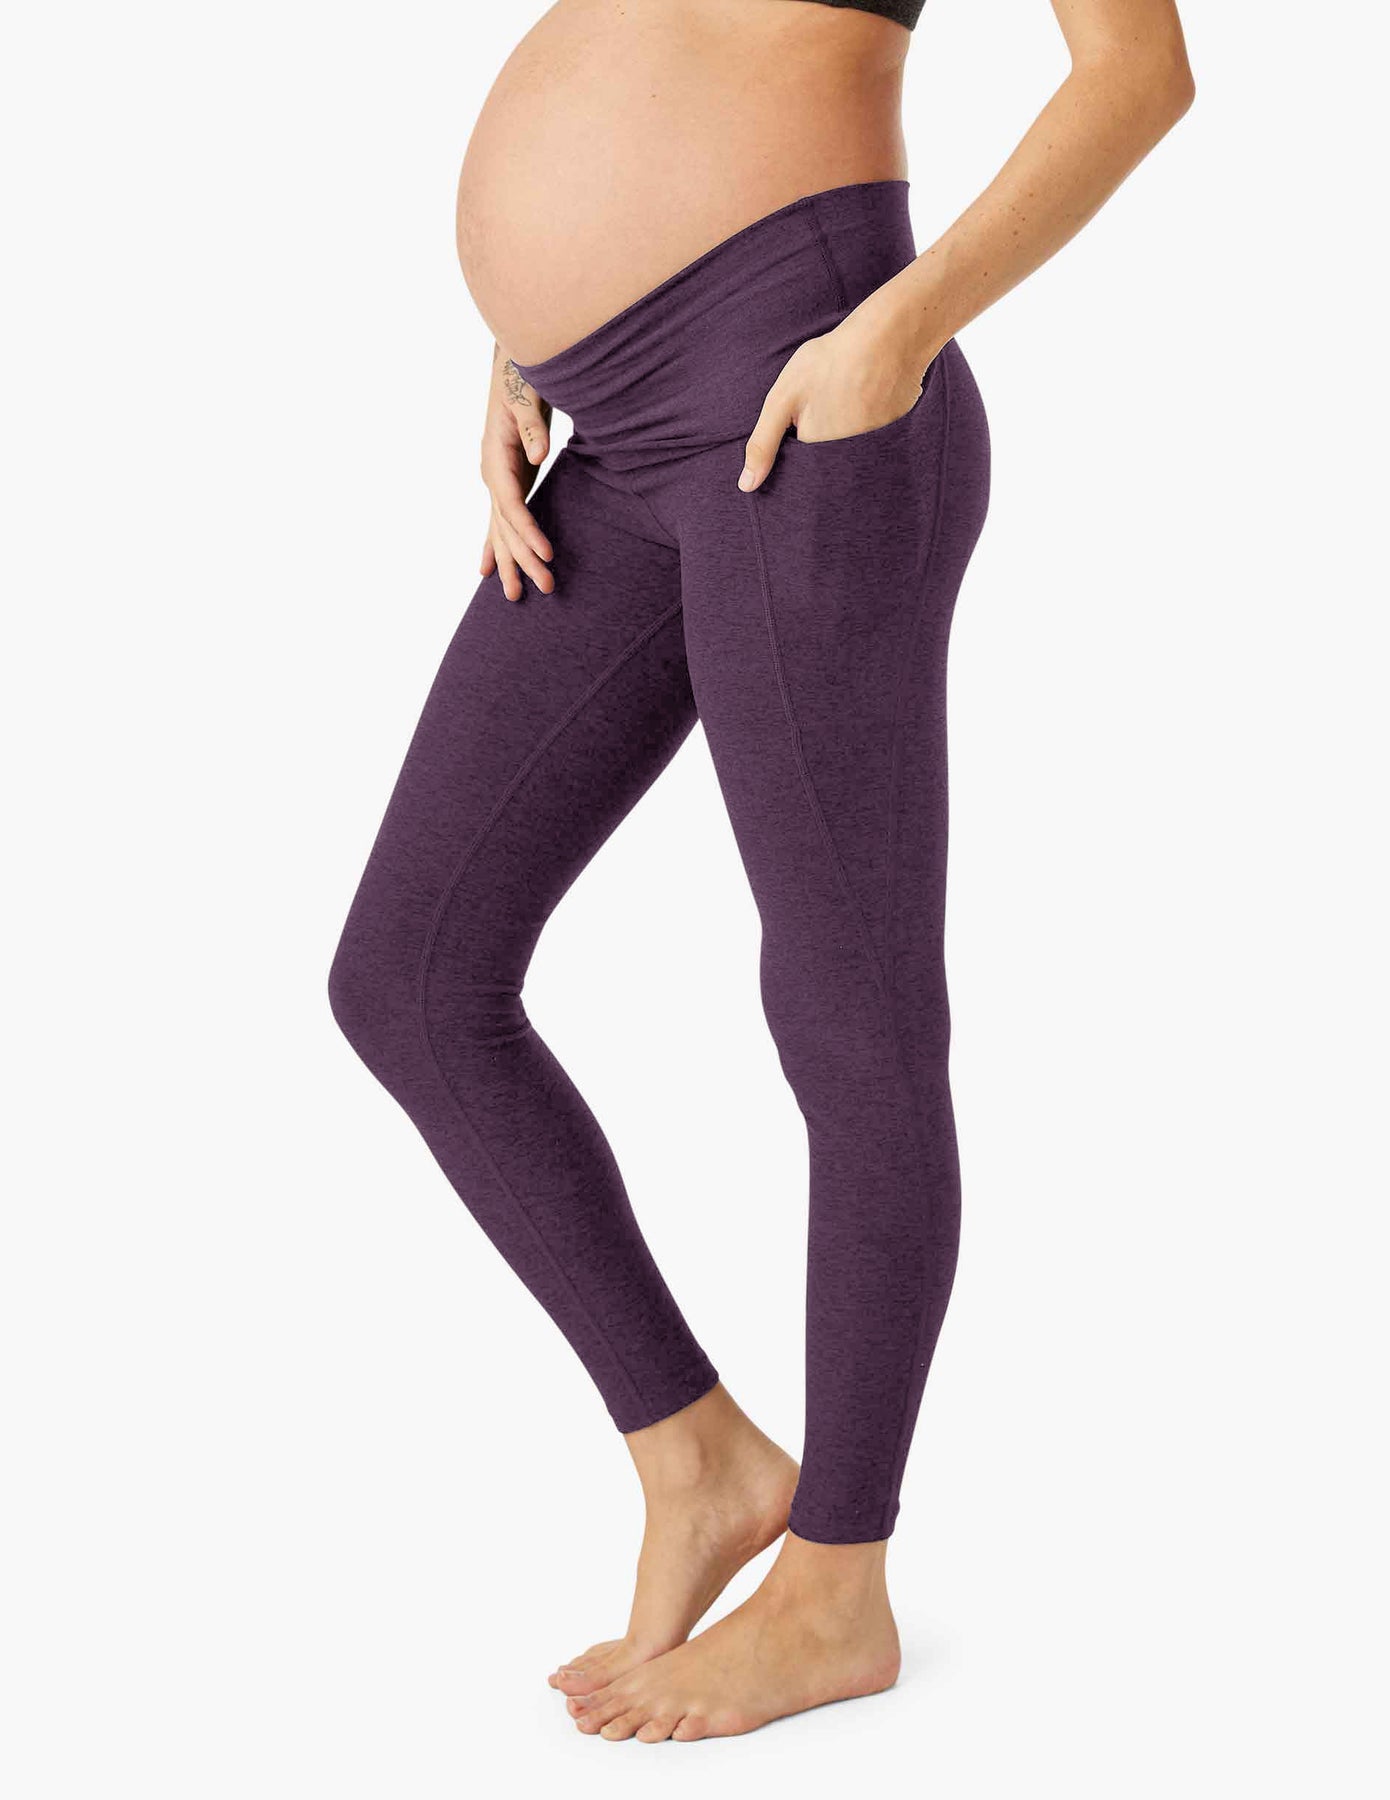 Maternity Athletic Leggings With Pockets